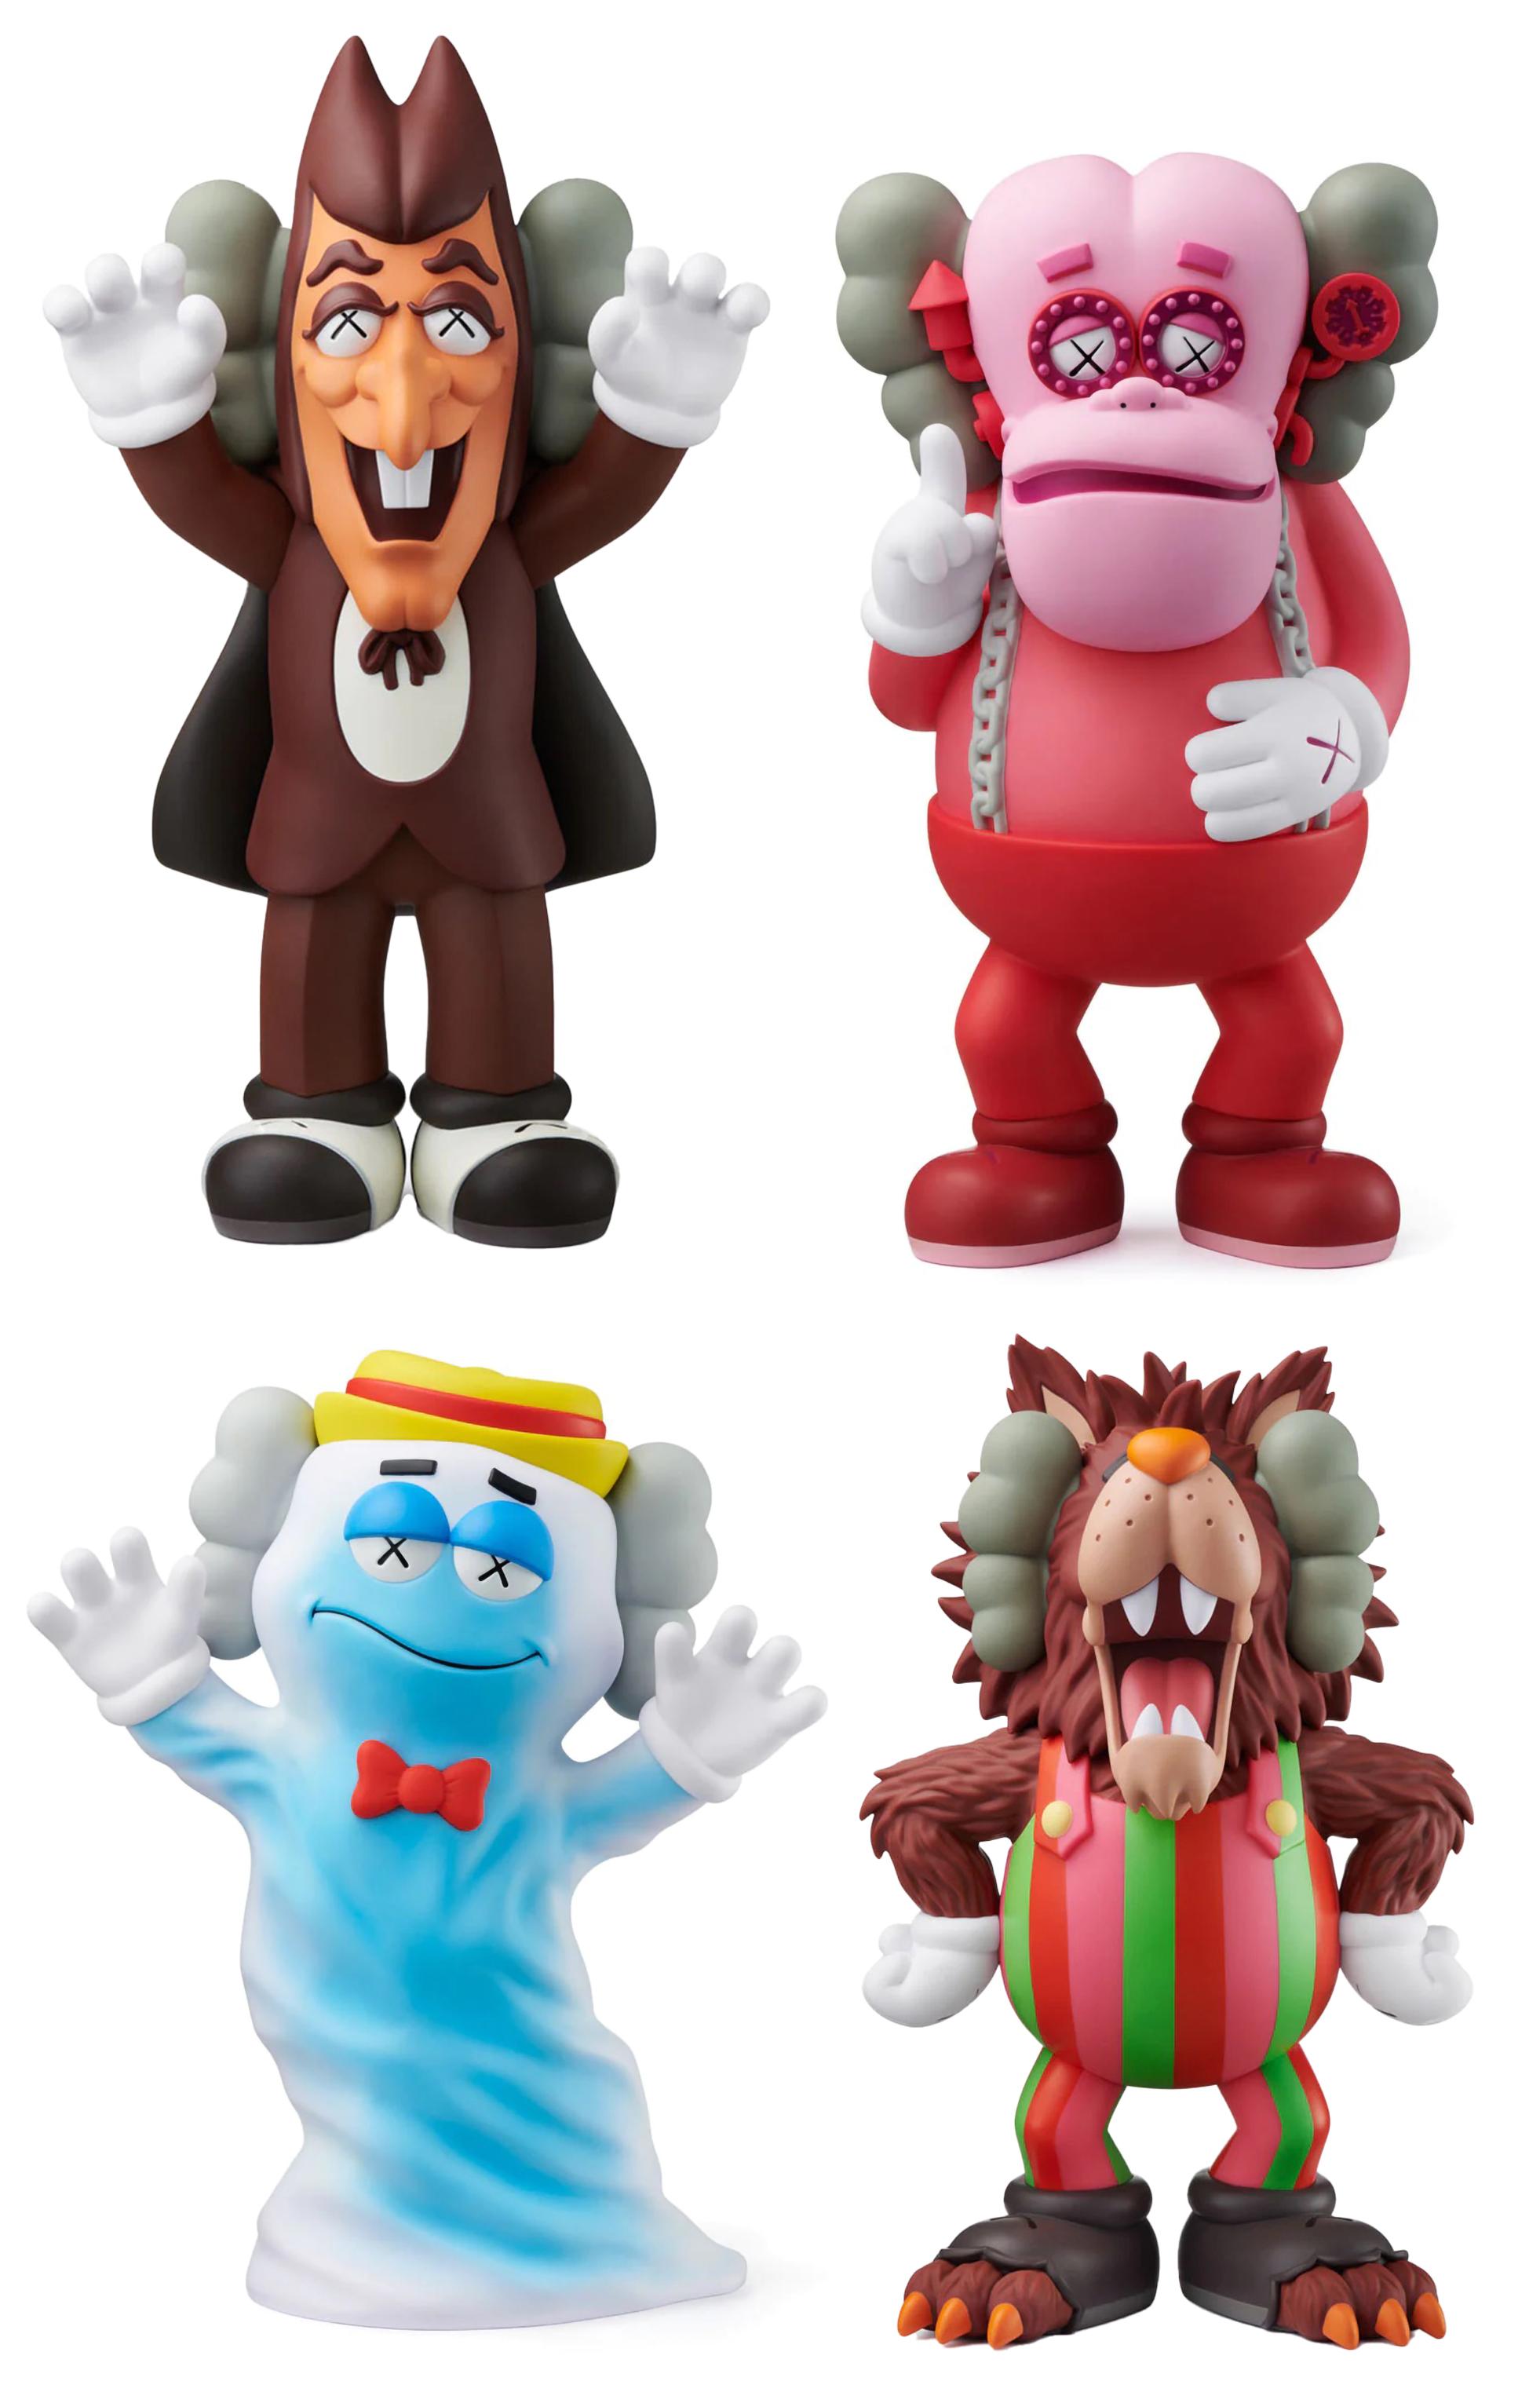 KAWS Monsters (complete set of 4 works):
A highly collectible & super decorative complete set of KAWS art toys, featuring the famed cereal characters: Frankenberry, Count Chocula, Boo Berry & Frute Brute.  A playful exploration of KAWS’s love for